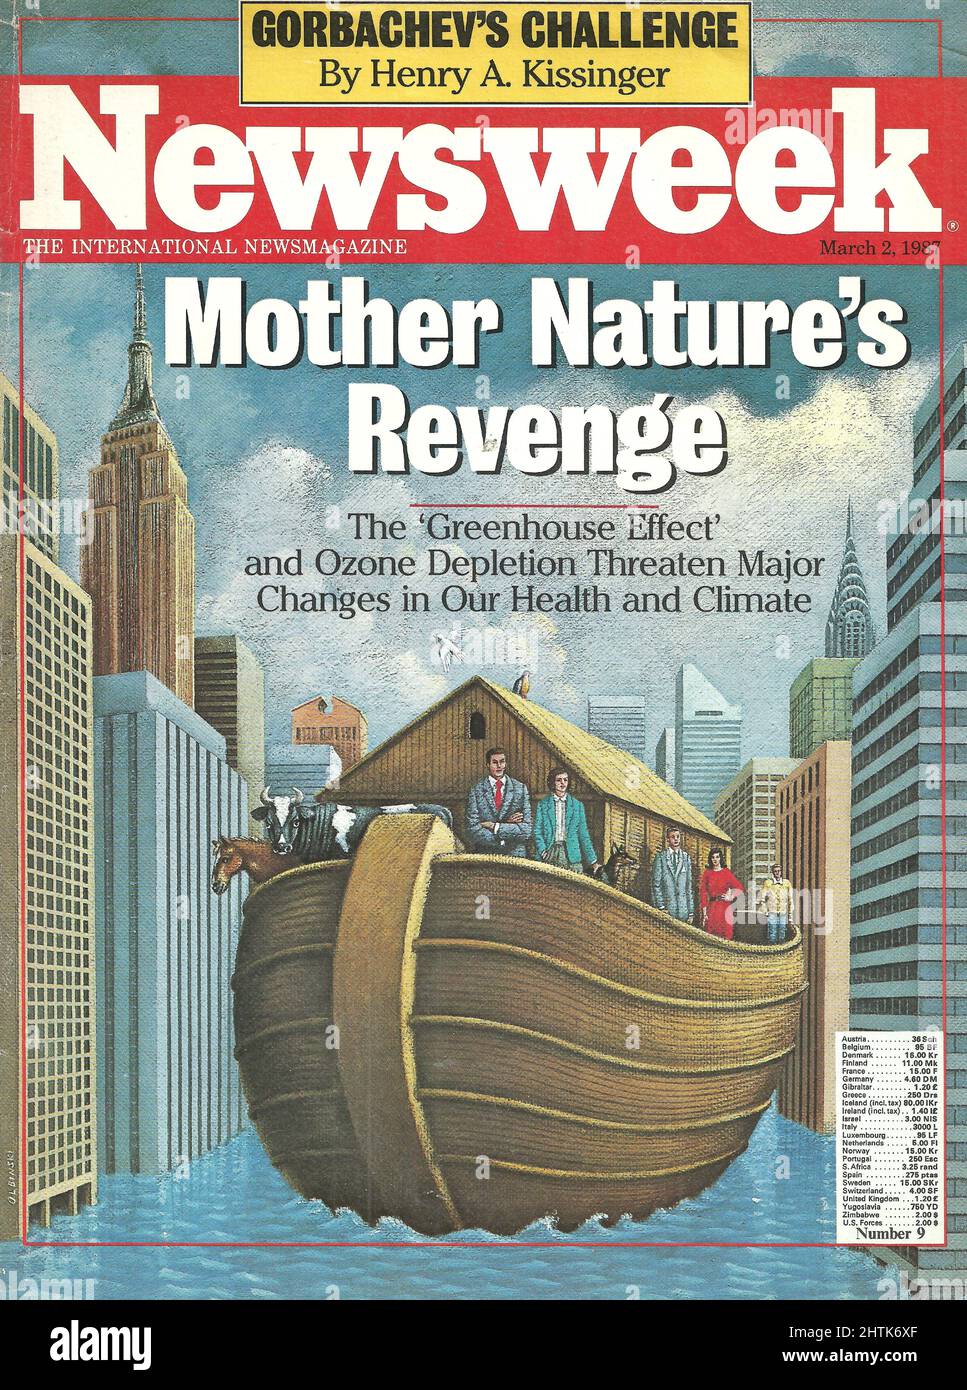 Newsweek cover March 2, 1987, Mother's nature revenge, The Greenhouse effect, cover by Rafal Olbinski Stock Photo